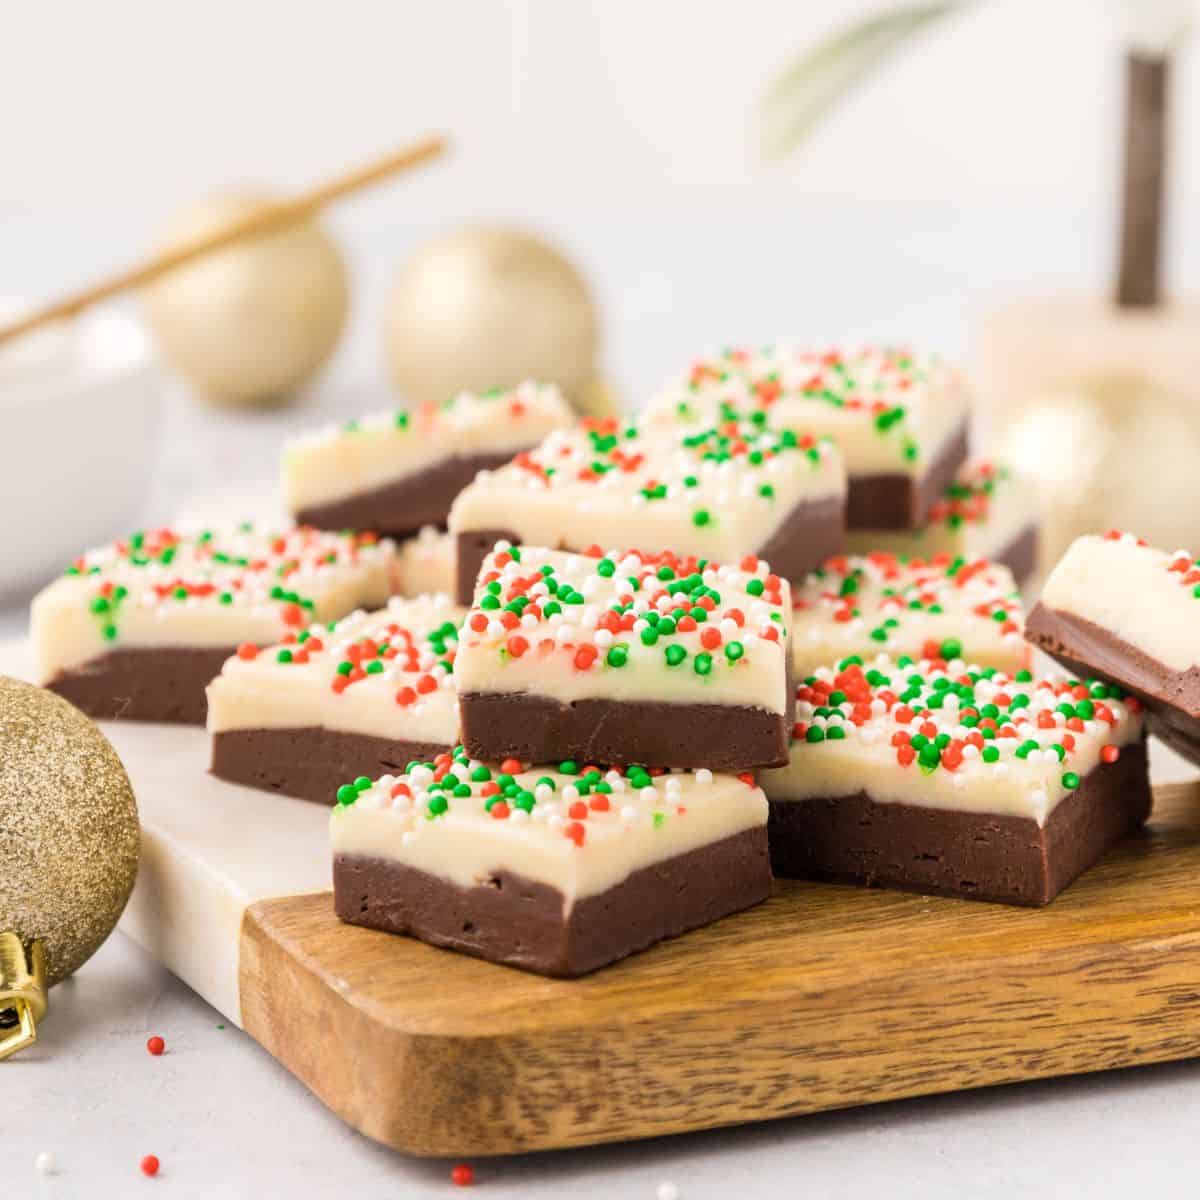 Layered fudge with Christmas sprinkles on cutting board.